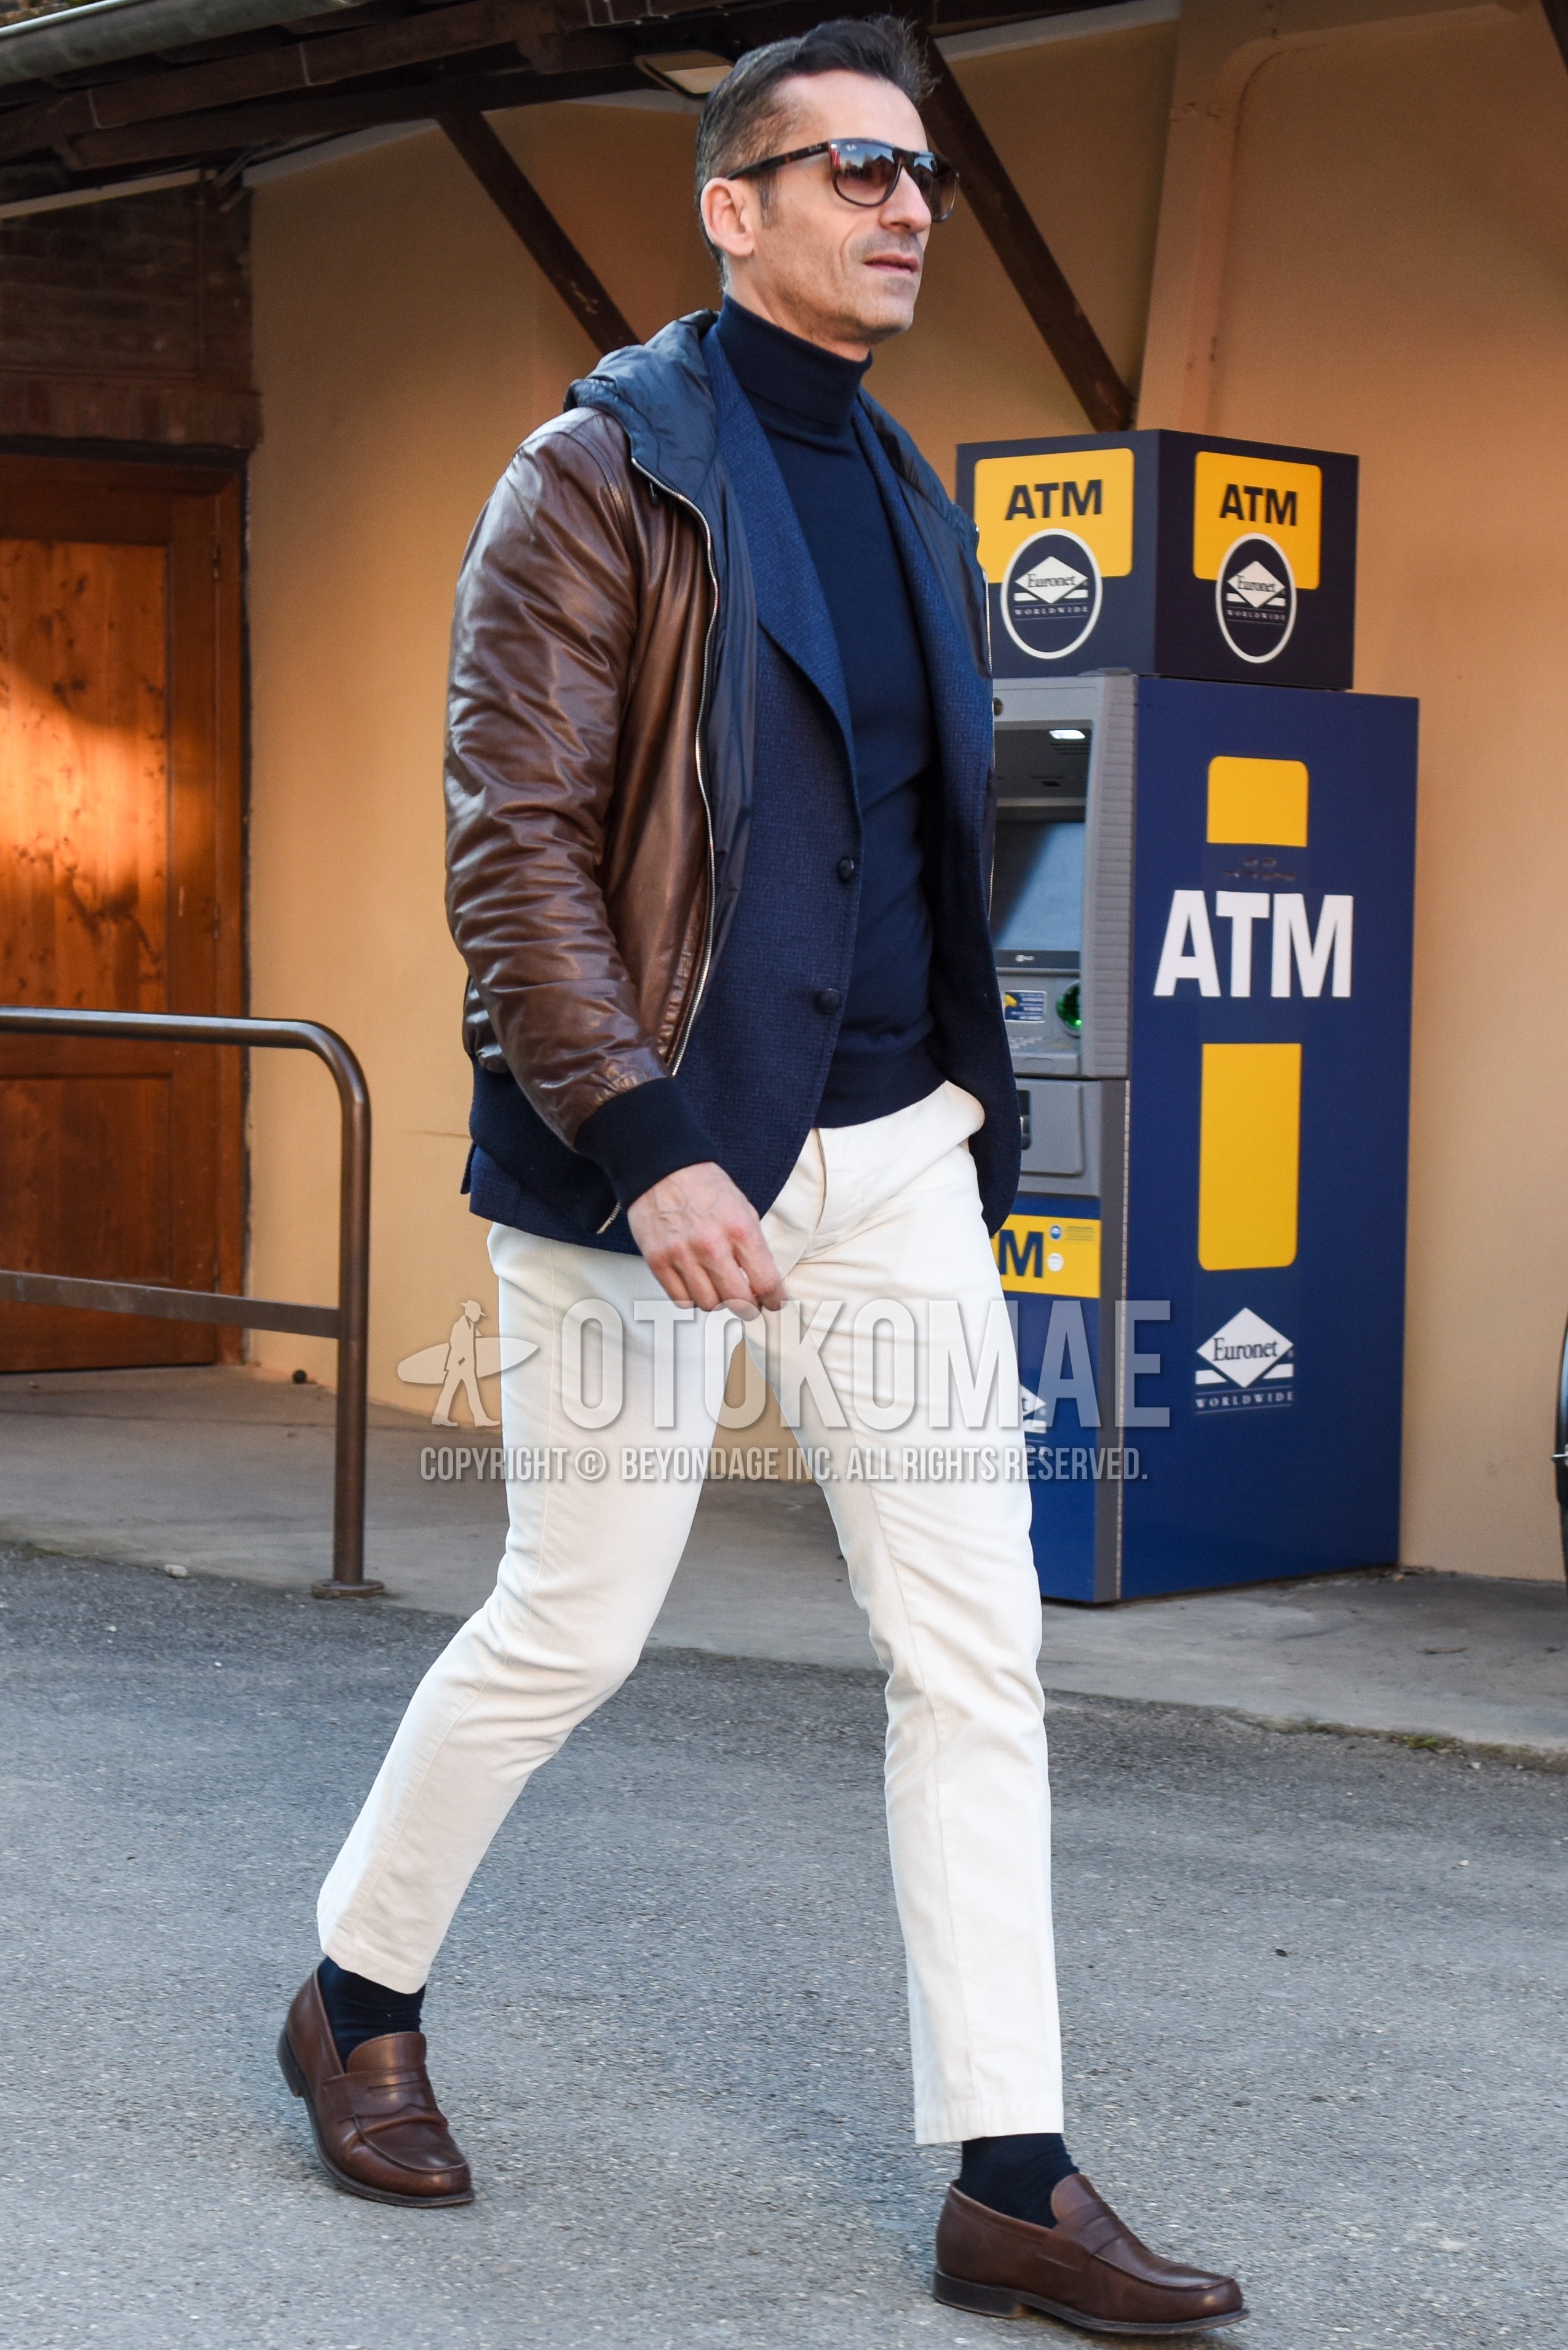 Men's autumn winter outfit with brown tortoiseshell sunglasses, brown plain leather jacket, gray plain tailored jacket, navy plain turtleneck knit, white plain chinos, white plain cropped pants, black plain socks, brown coin loafers leather shoes.